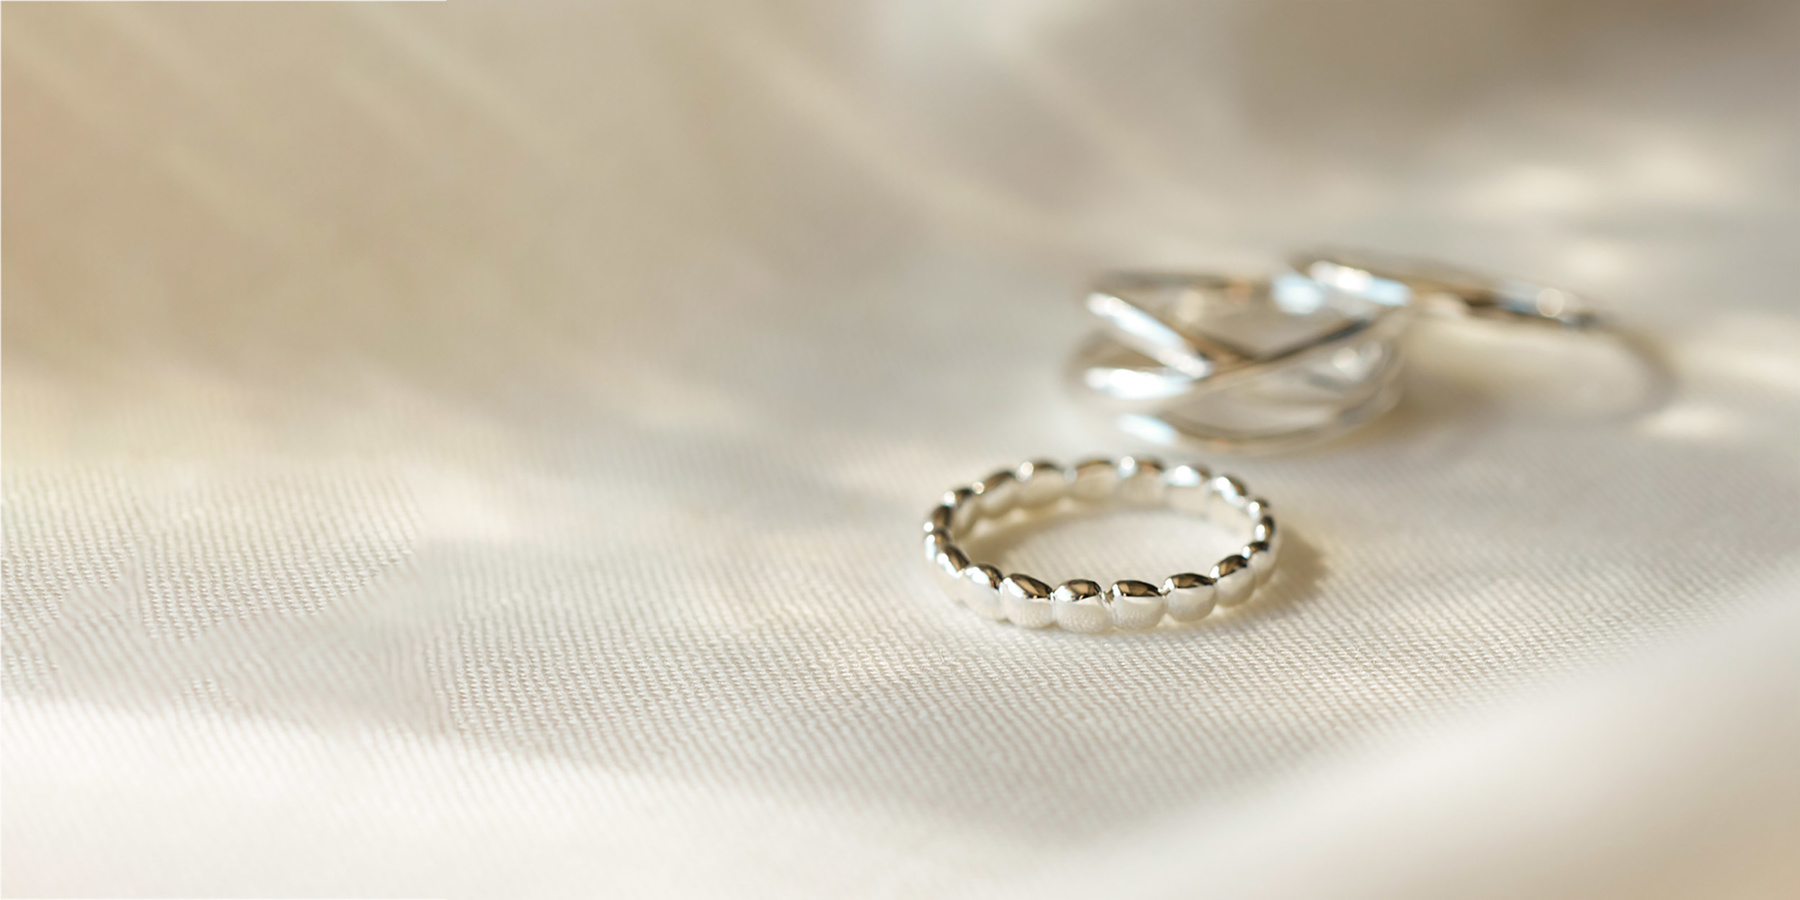 Plain silver rings on white cloth backdrop